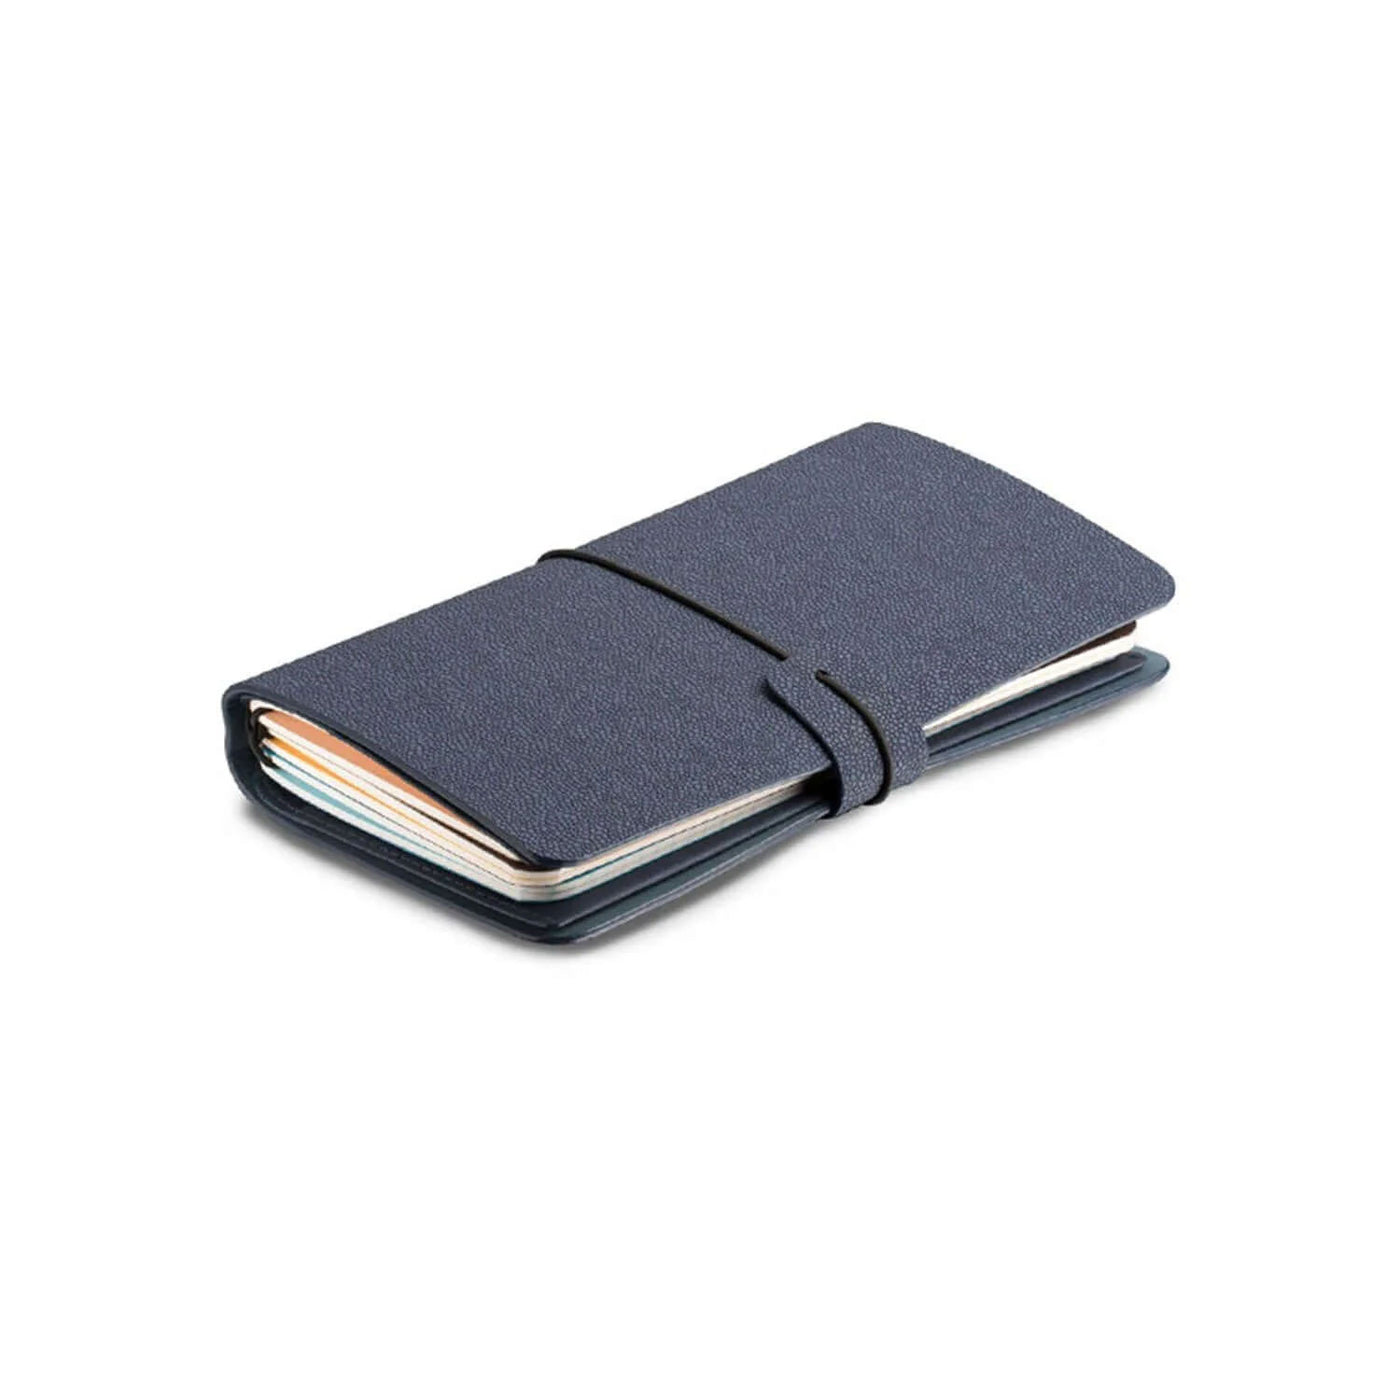 Pennline Quikrite Pebl Journal, Midnight Blue (Plain, Ruled, Square Ruled, Dot Ruled) - A5 2